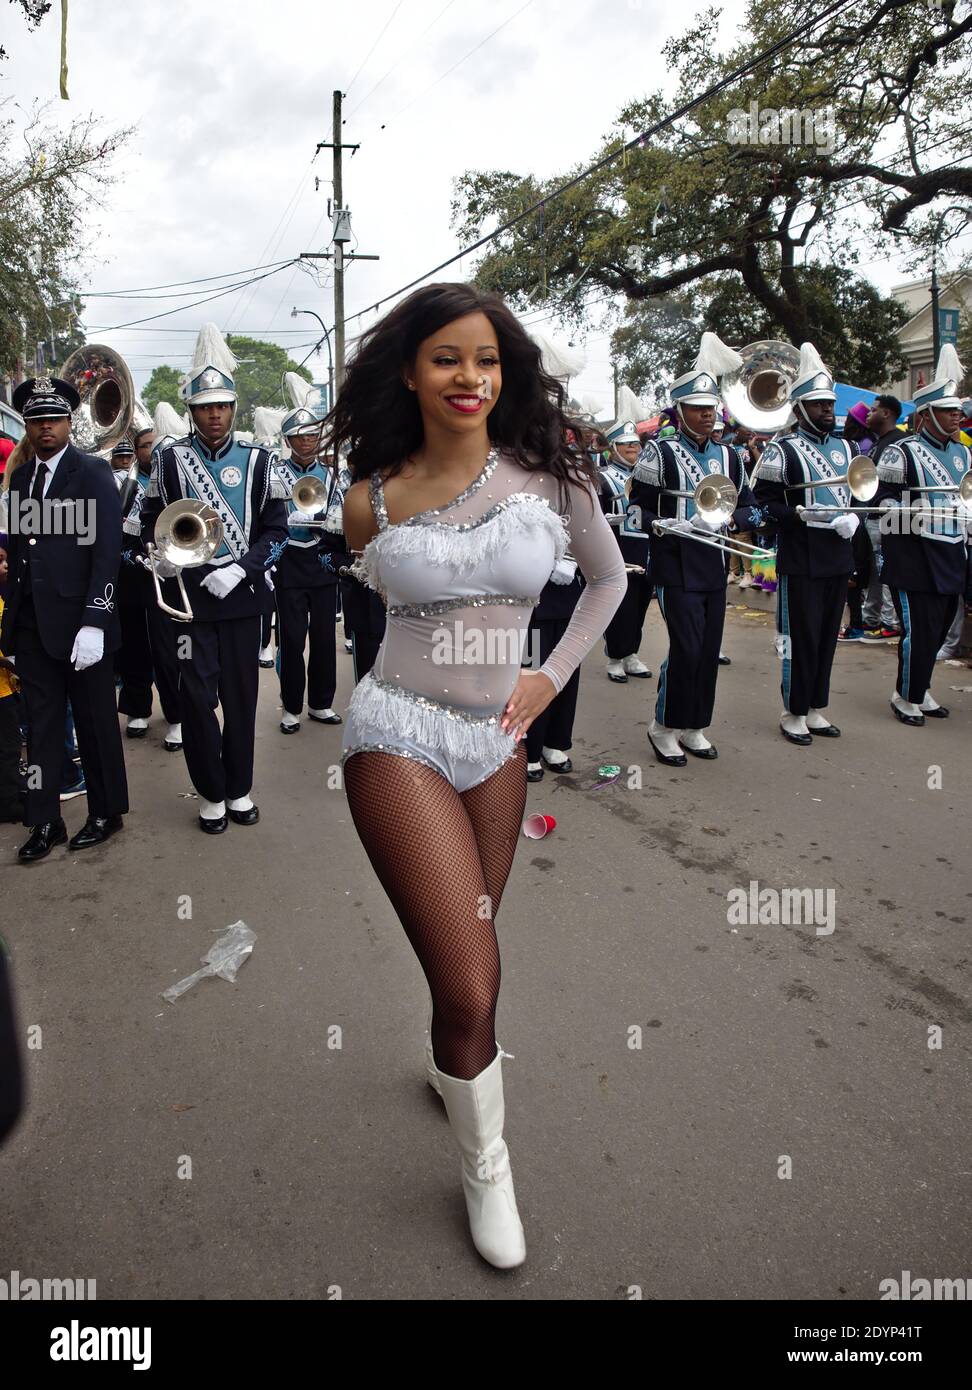 New Orleans, Louisiana, USA -  February 25, 2020: People celebrate Mardi Gras during the traditional Zulu parade, one of the main city parades. Stock Photo